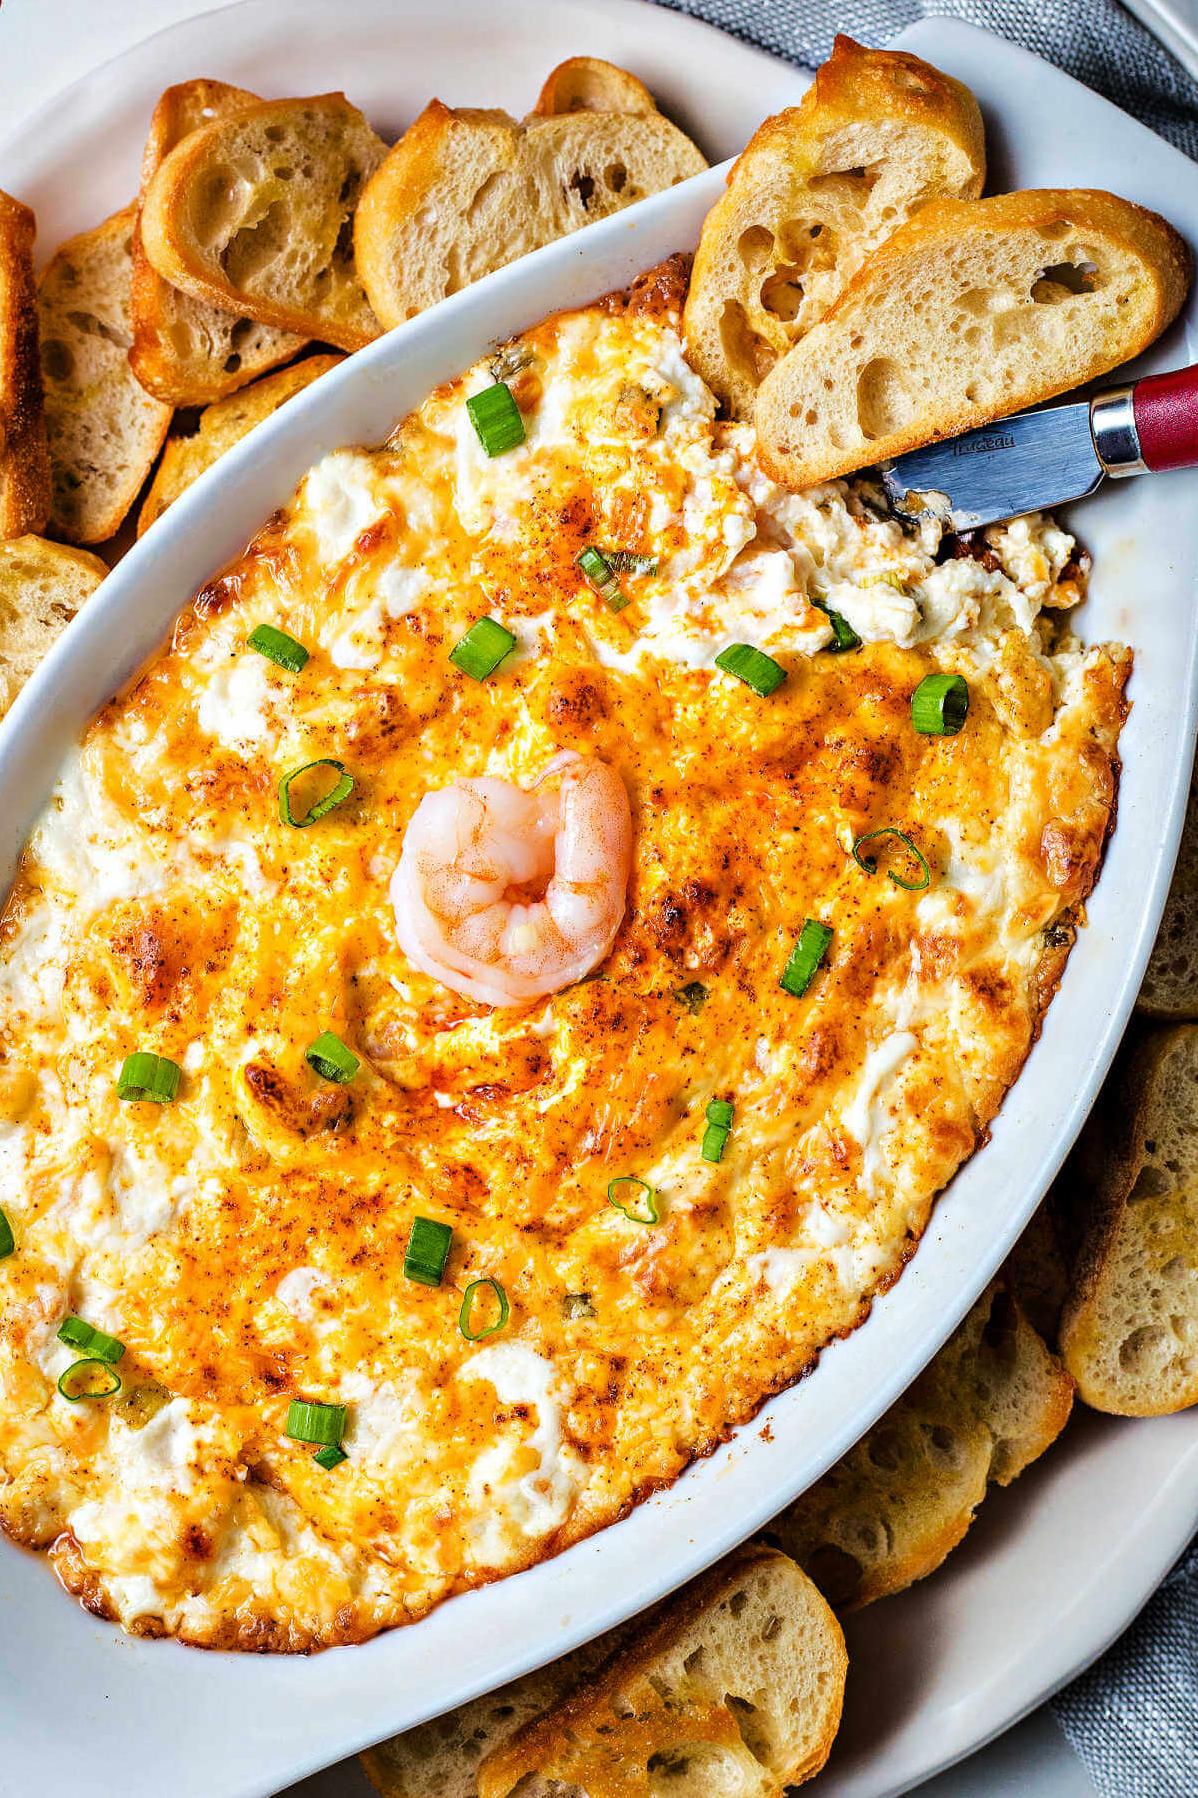  The ultimate recipe for a crowd pleaser - this Shrimp Dip is sure to impress.